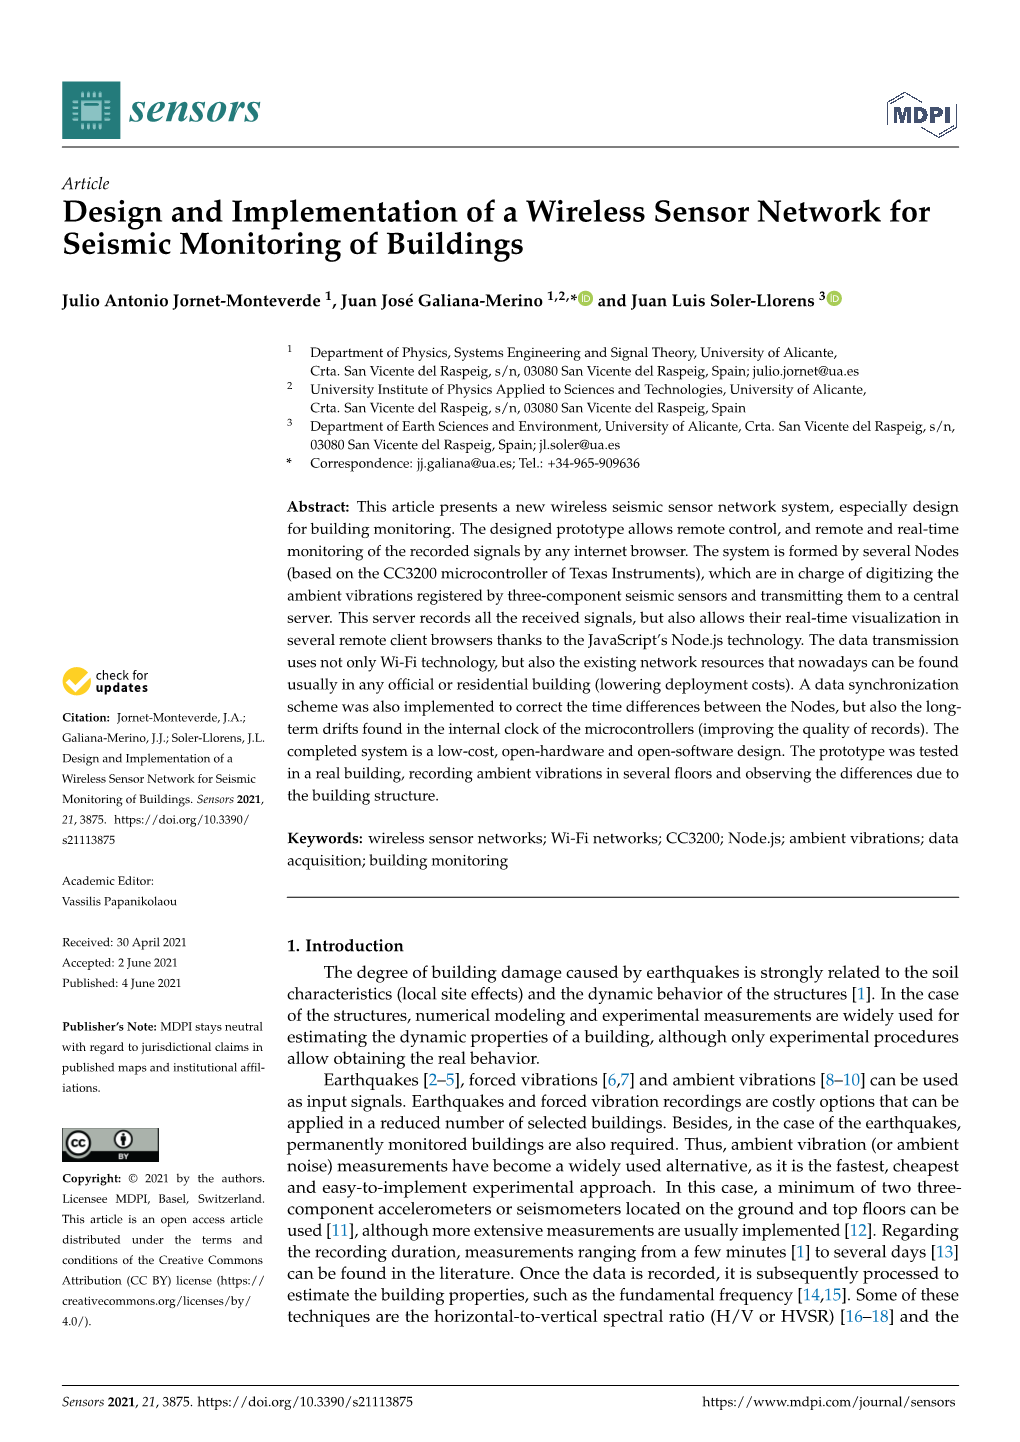 Design and Implementation of a Wireless Sensor Network for Seismic Monitoring of Buildings